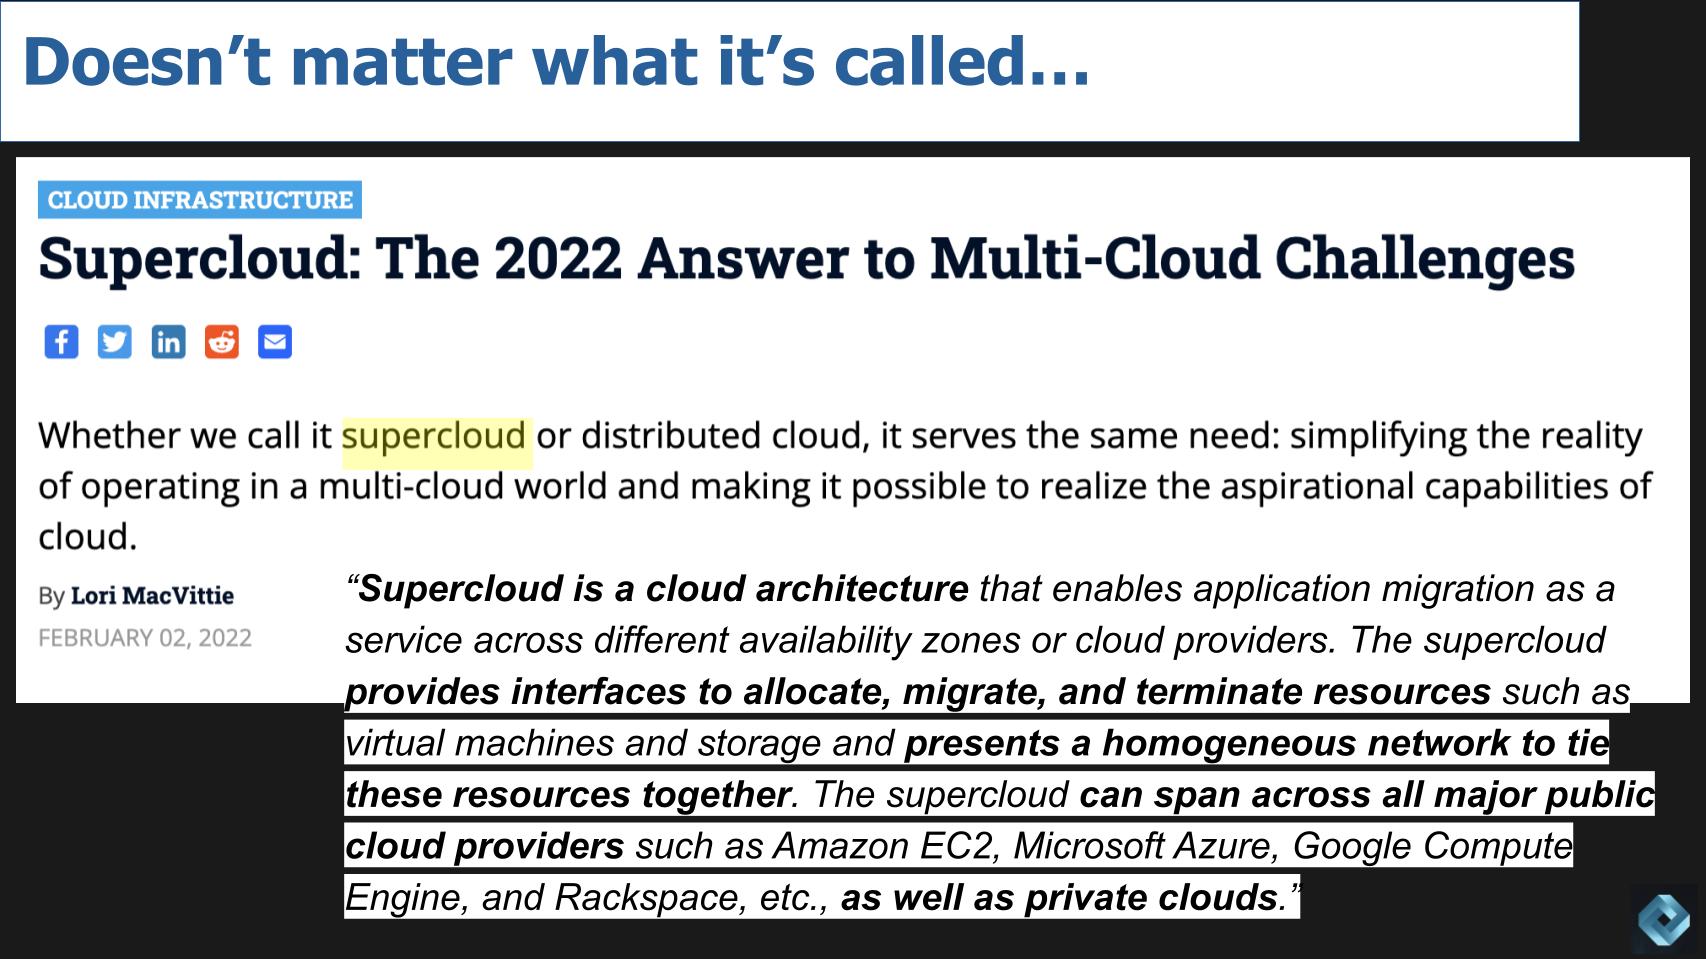 Article by Lori MacVittie titled Supercloud: The 2022 Answer to Multi-Cloud challenges